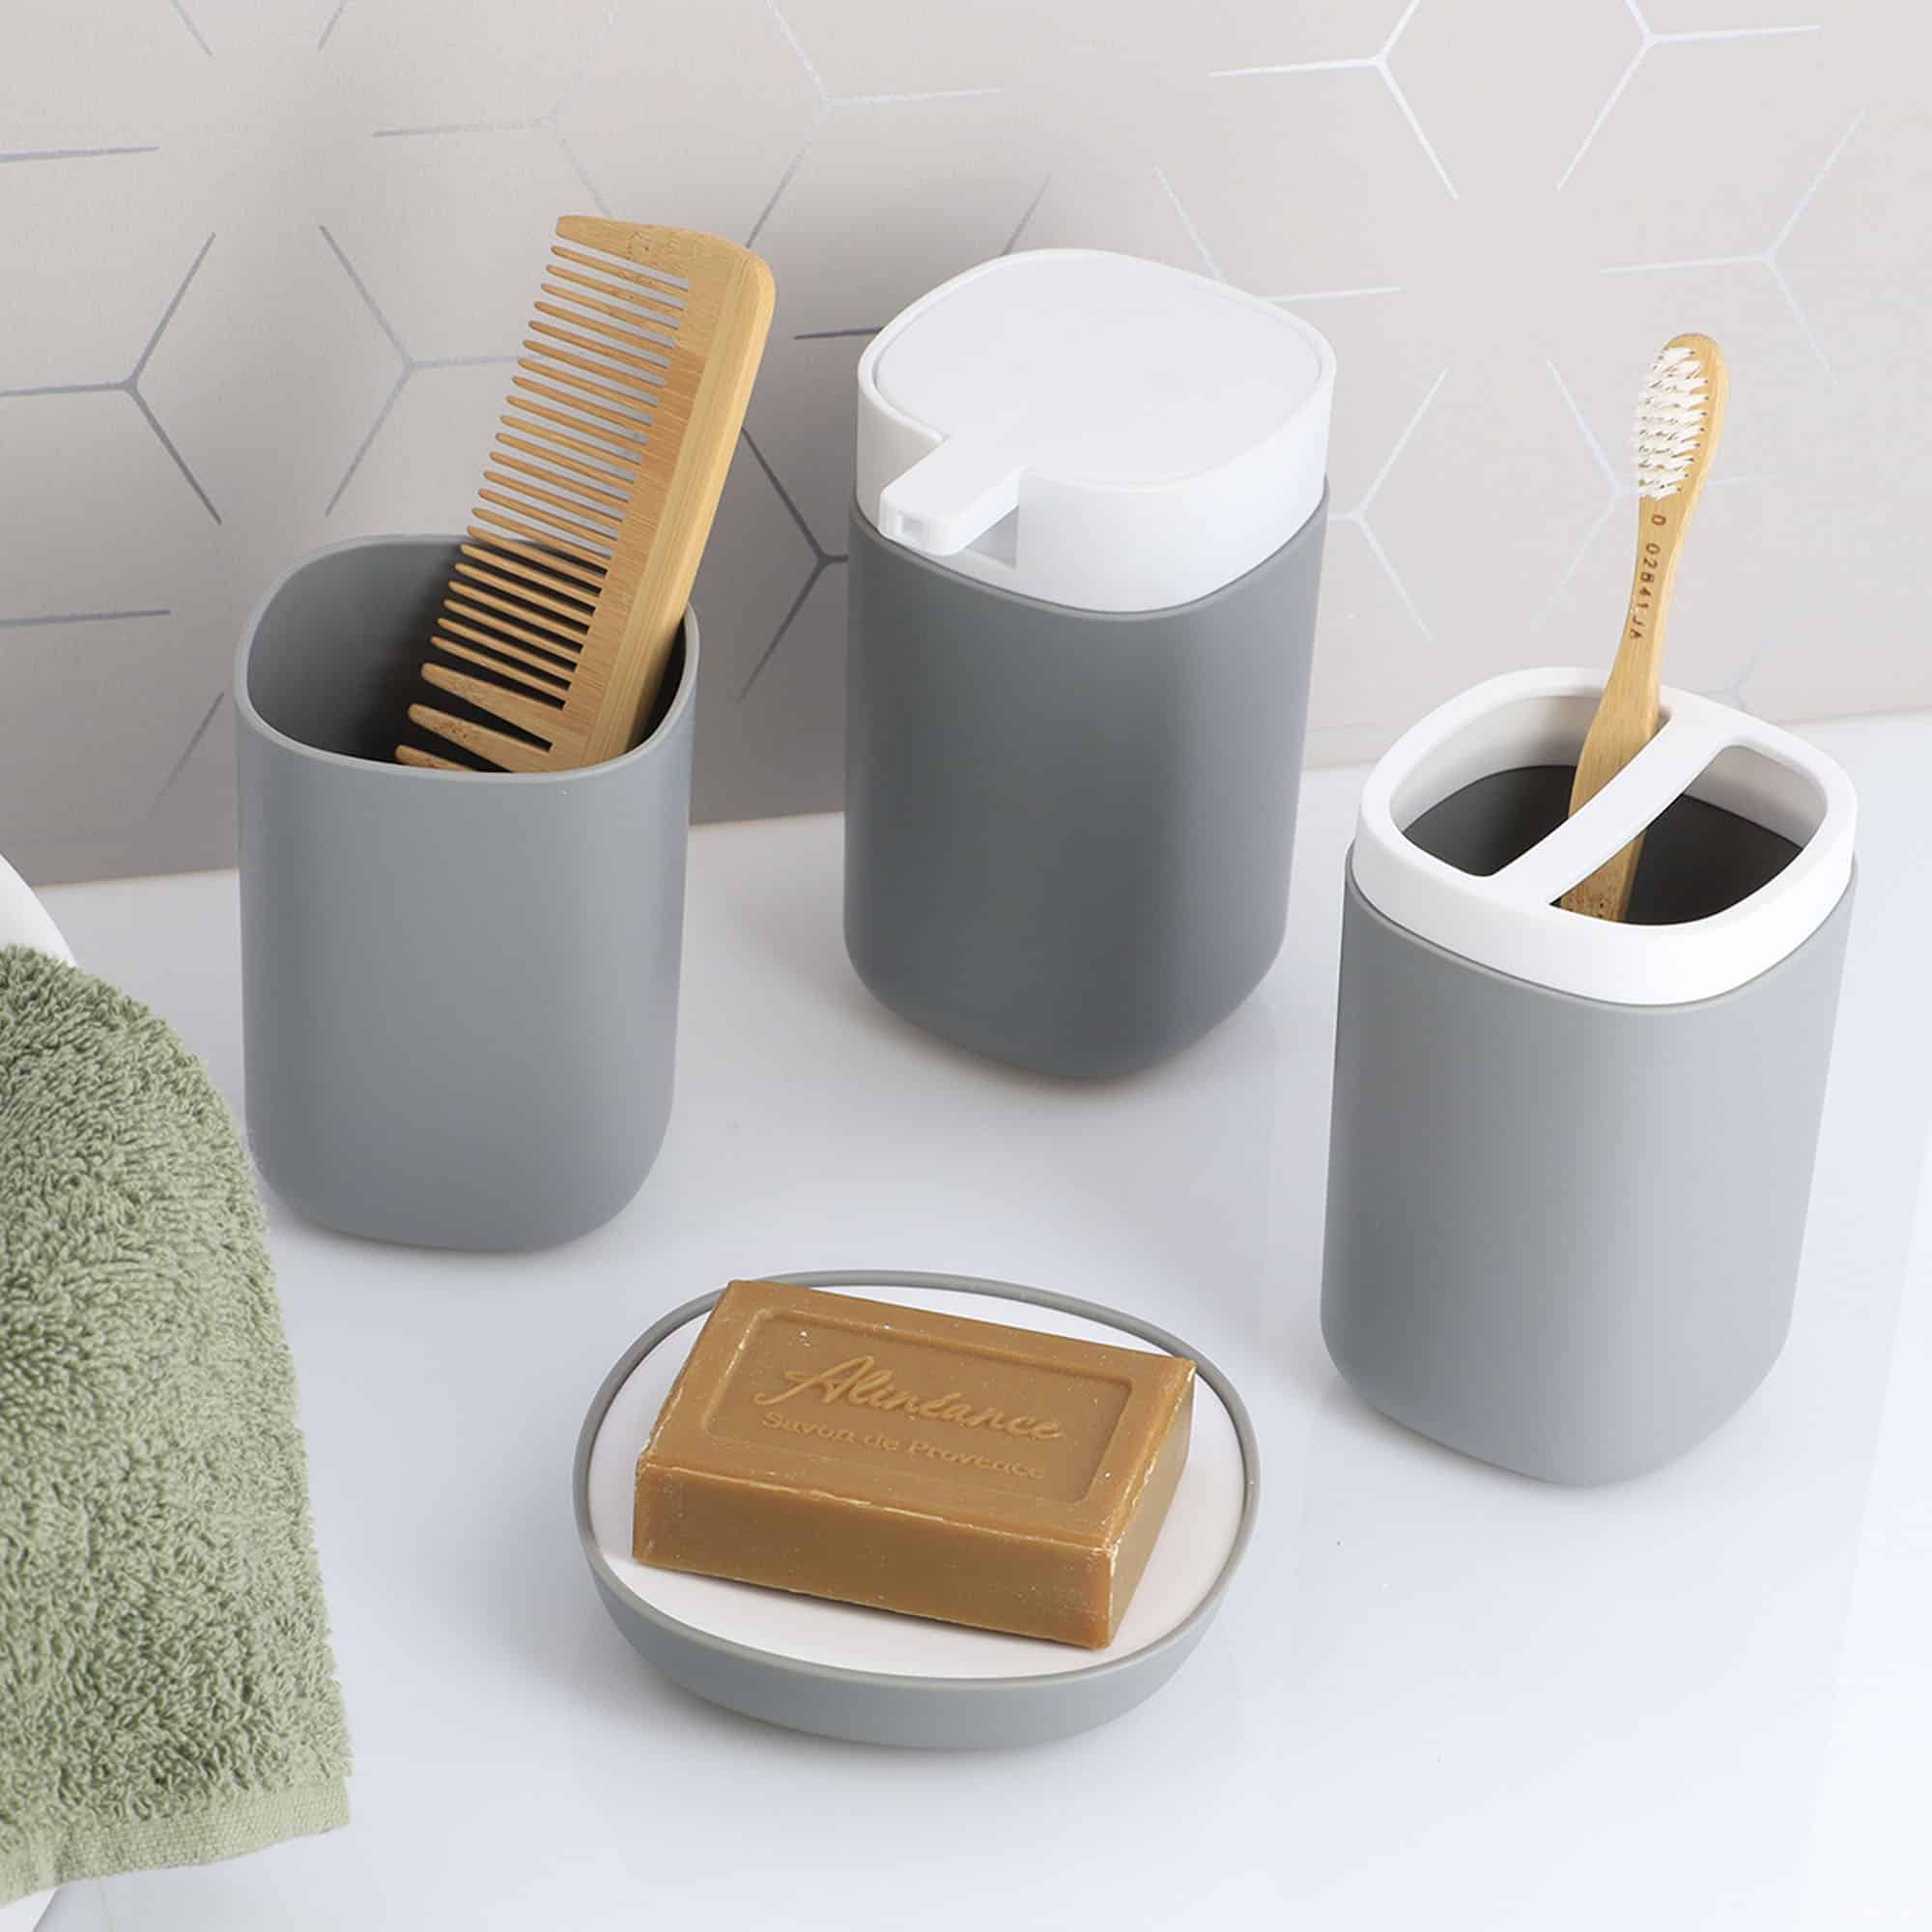 Minimalist bicolor ensemble for clean bathroom counter, perfect to hold bar soap, toothbrush, brushes and combs, make up accessories